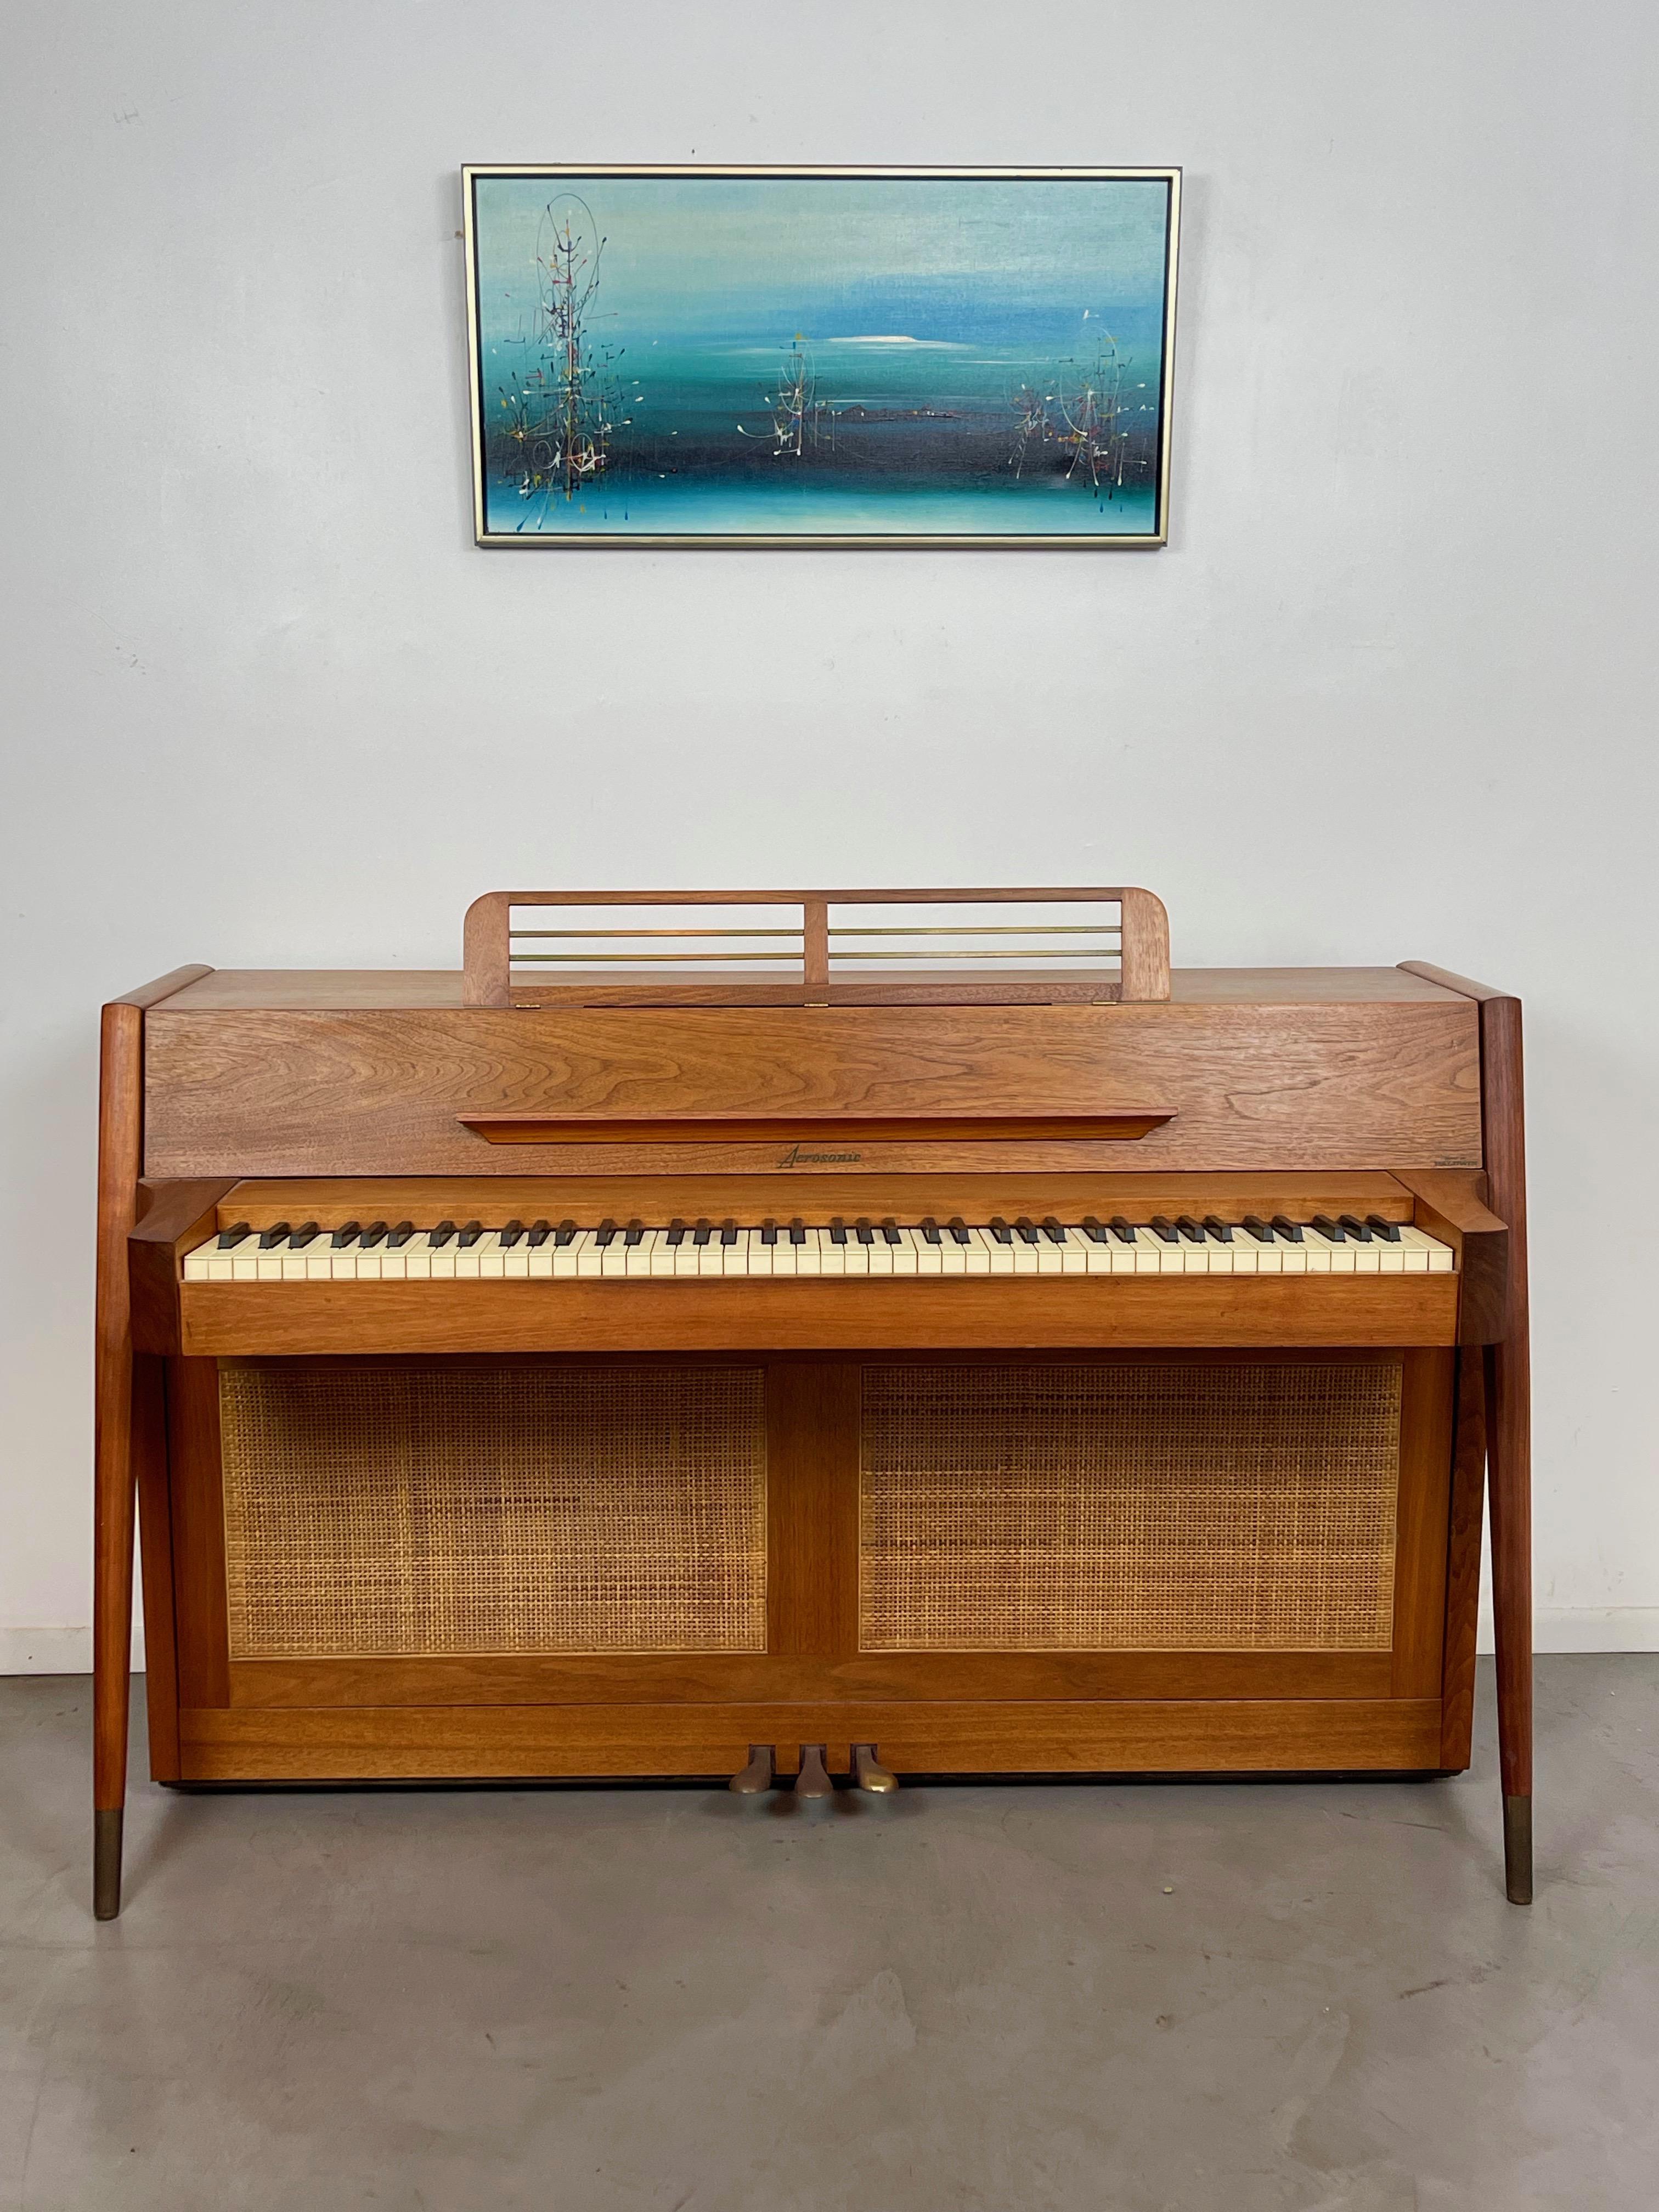 Rare stunning mid-century danish modern Acrosonic spinet piano made by Baldwin. Its Danish modern tapered leg design and solid teak wood cabinet makes it as much a work of art as it is a musical instrument. Covered front and back with beautiful